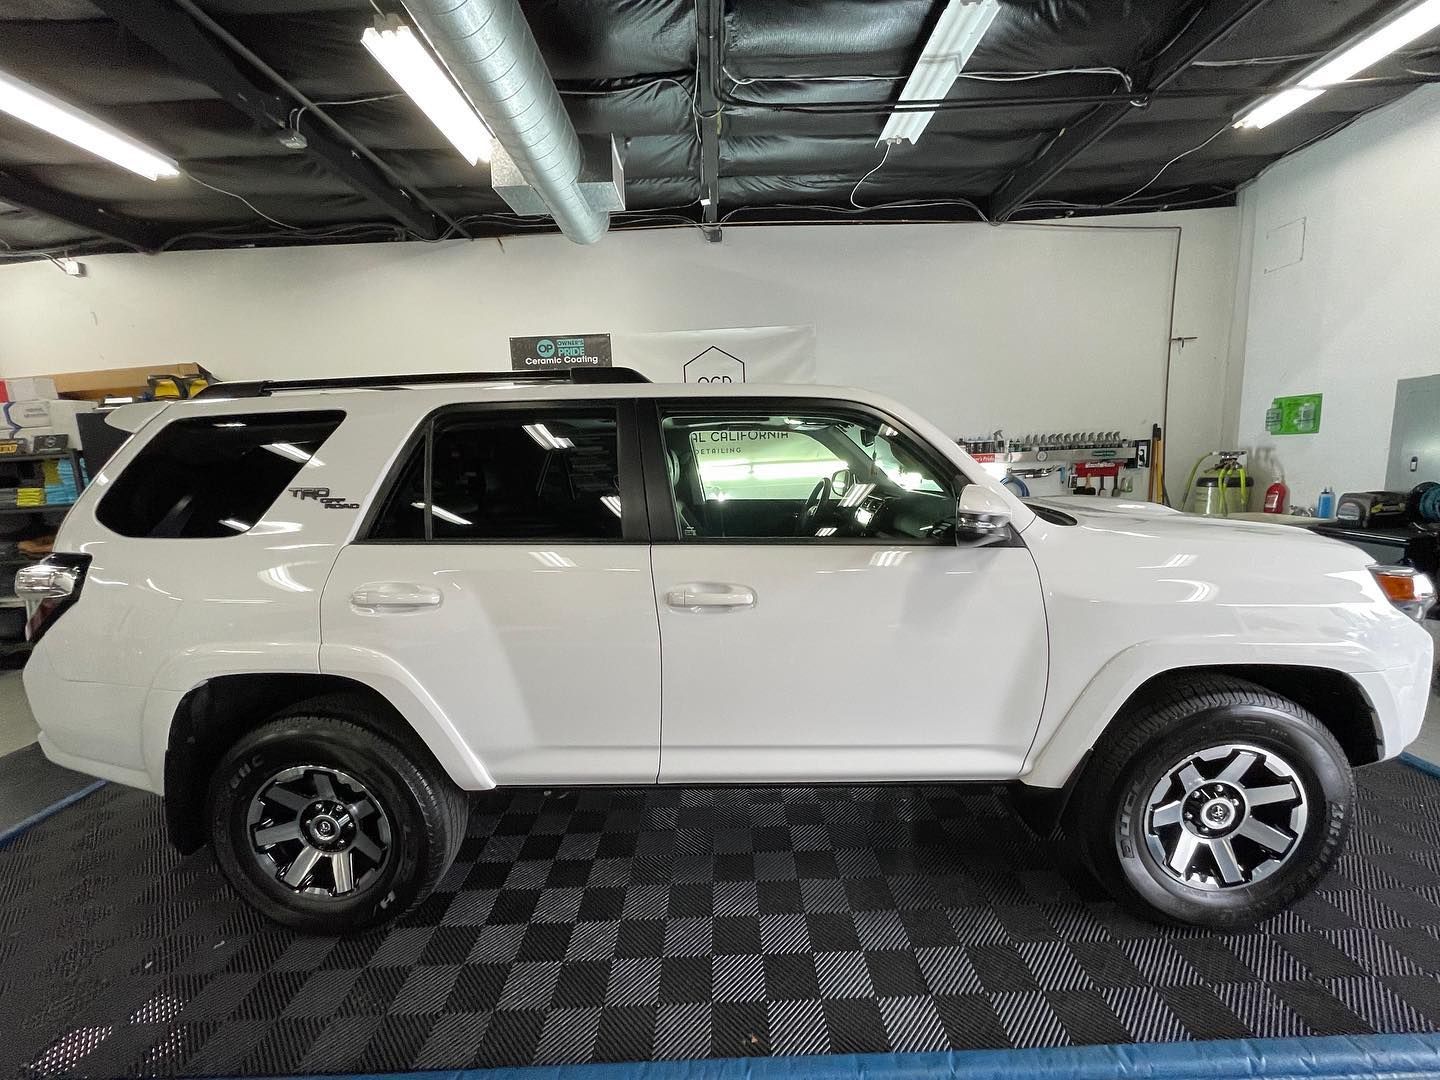 A white toyota 4runner is parked in a garage.